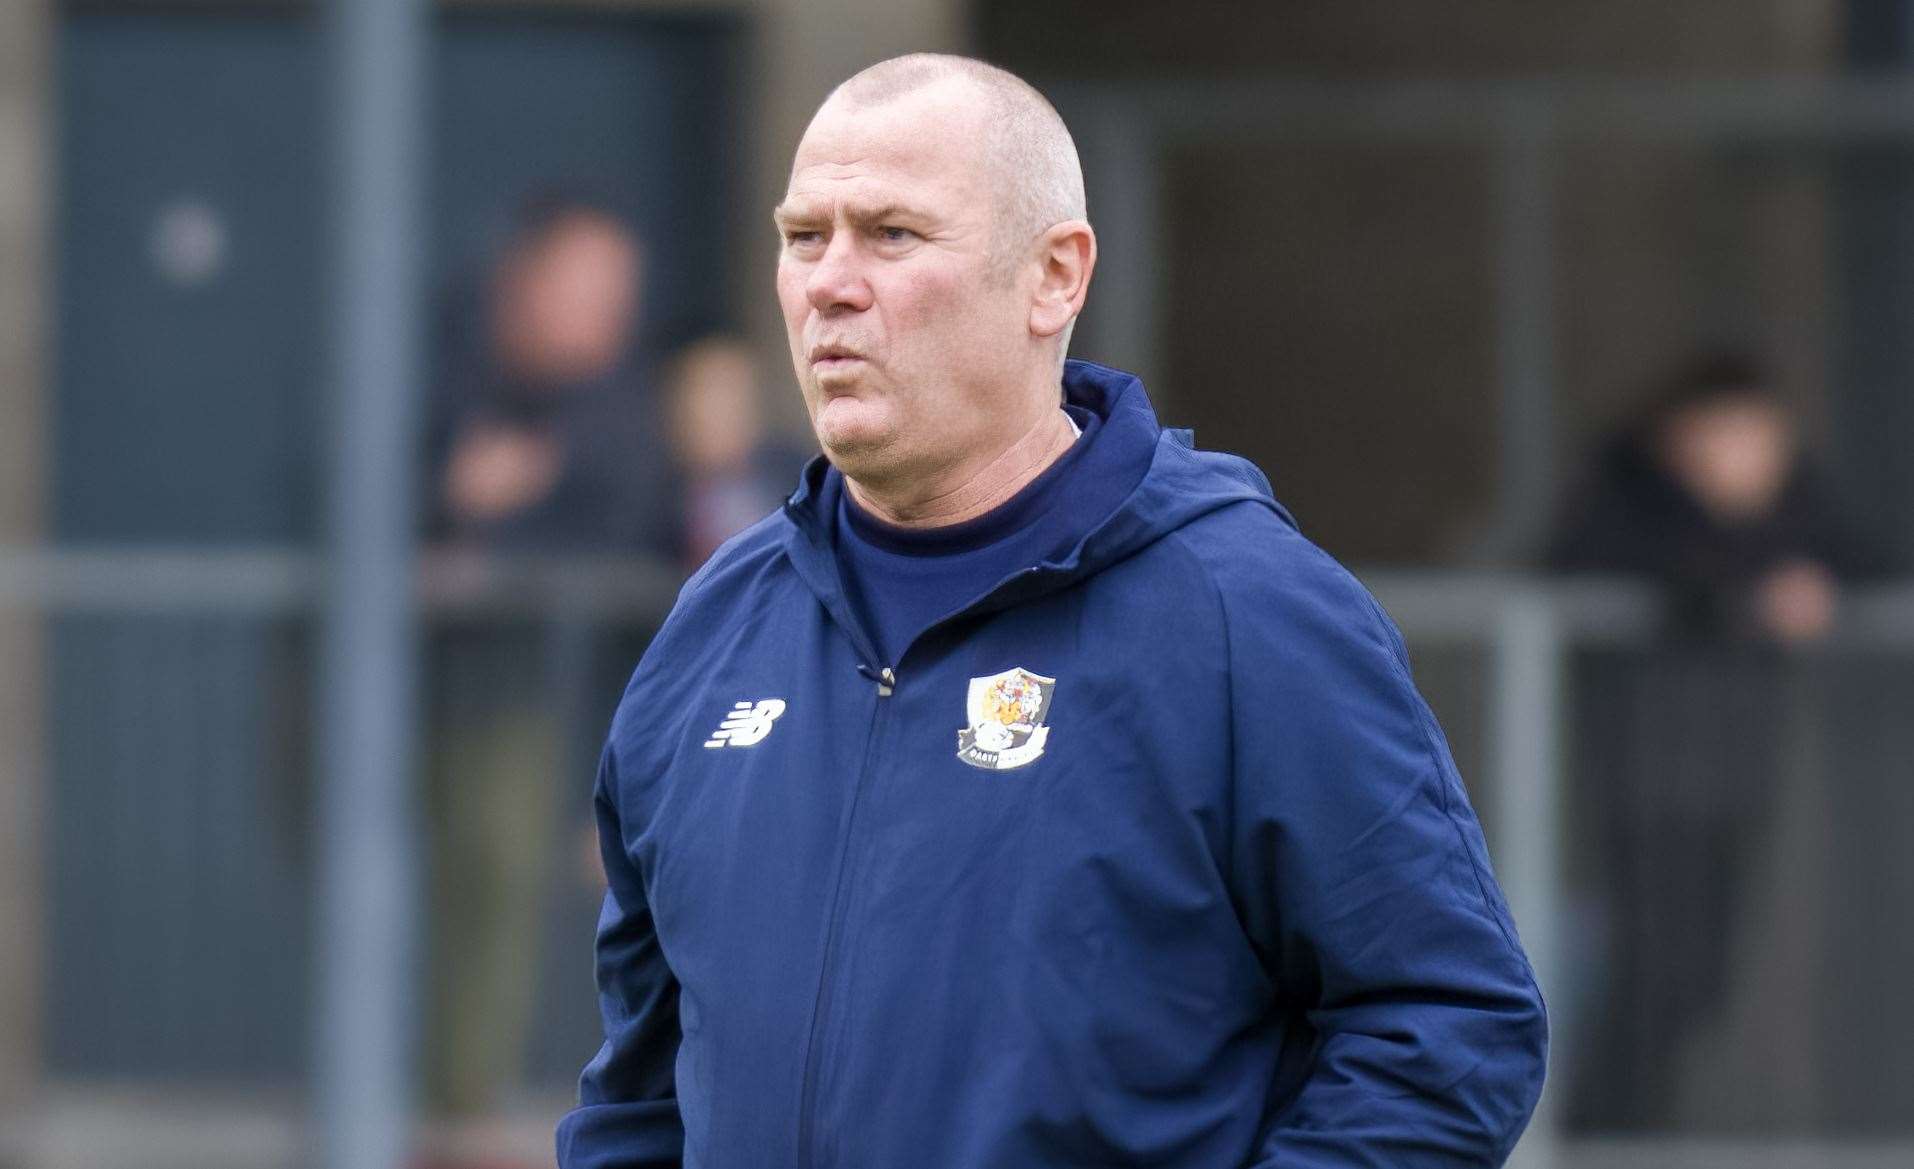 Dartford manager Alan Dowson - saw his team held at home by Oxford City on Saturday.